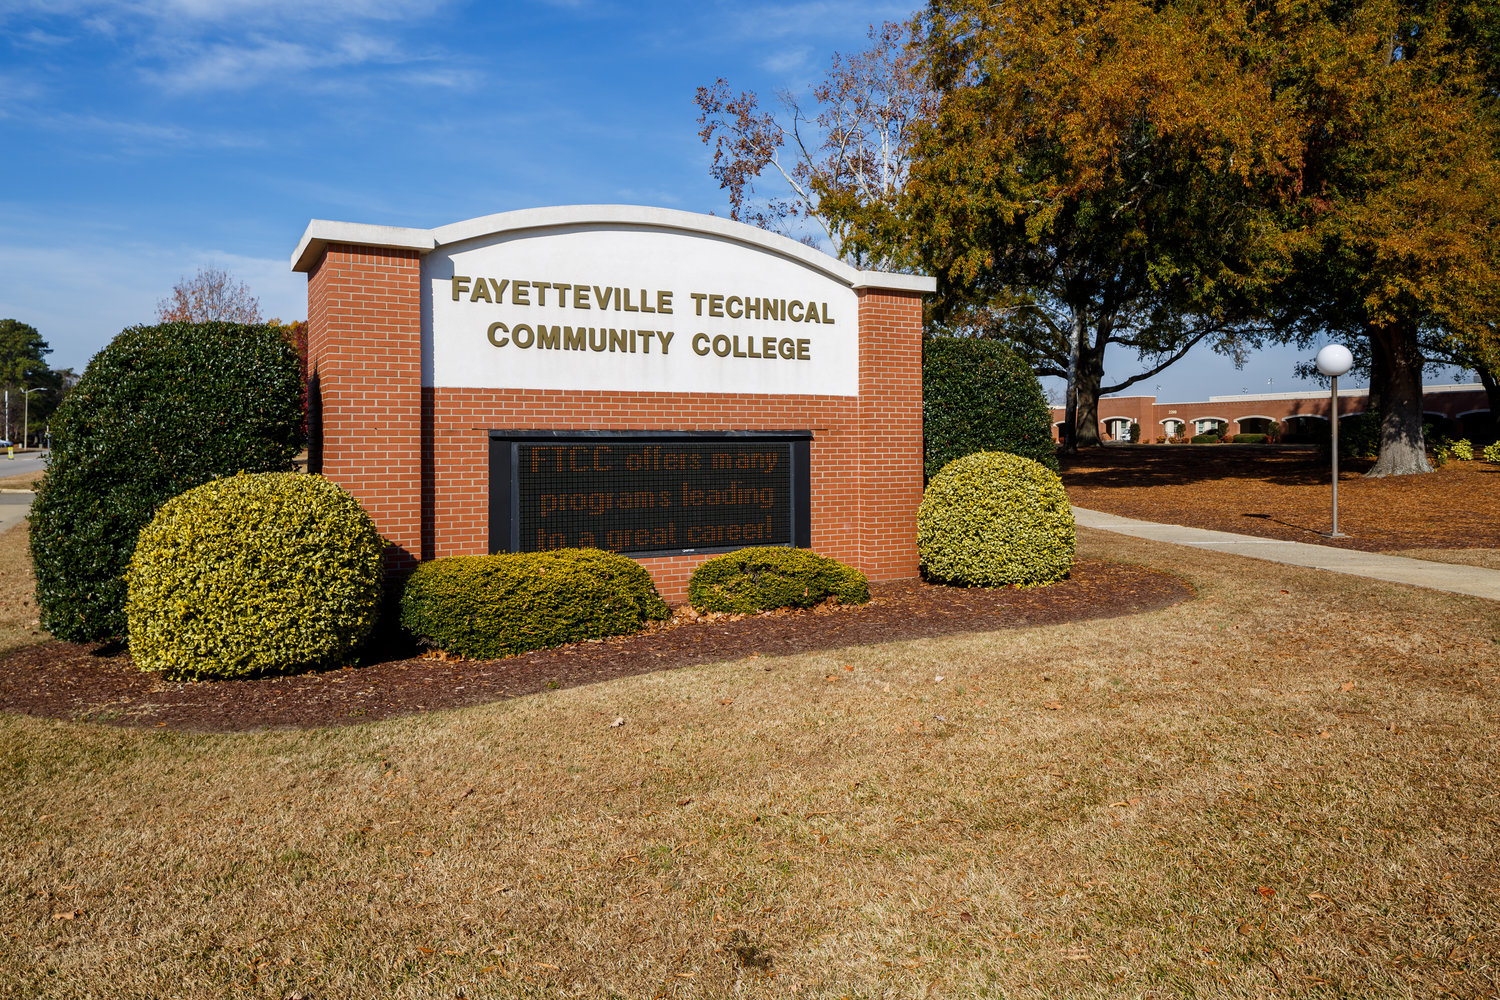 Fayetteville Technical Community College has announced that it will shift some operations temporarily online next week because of the recent surge in positive cases.